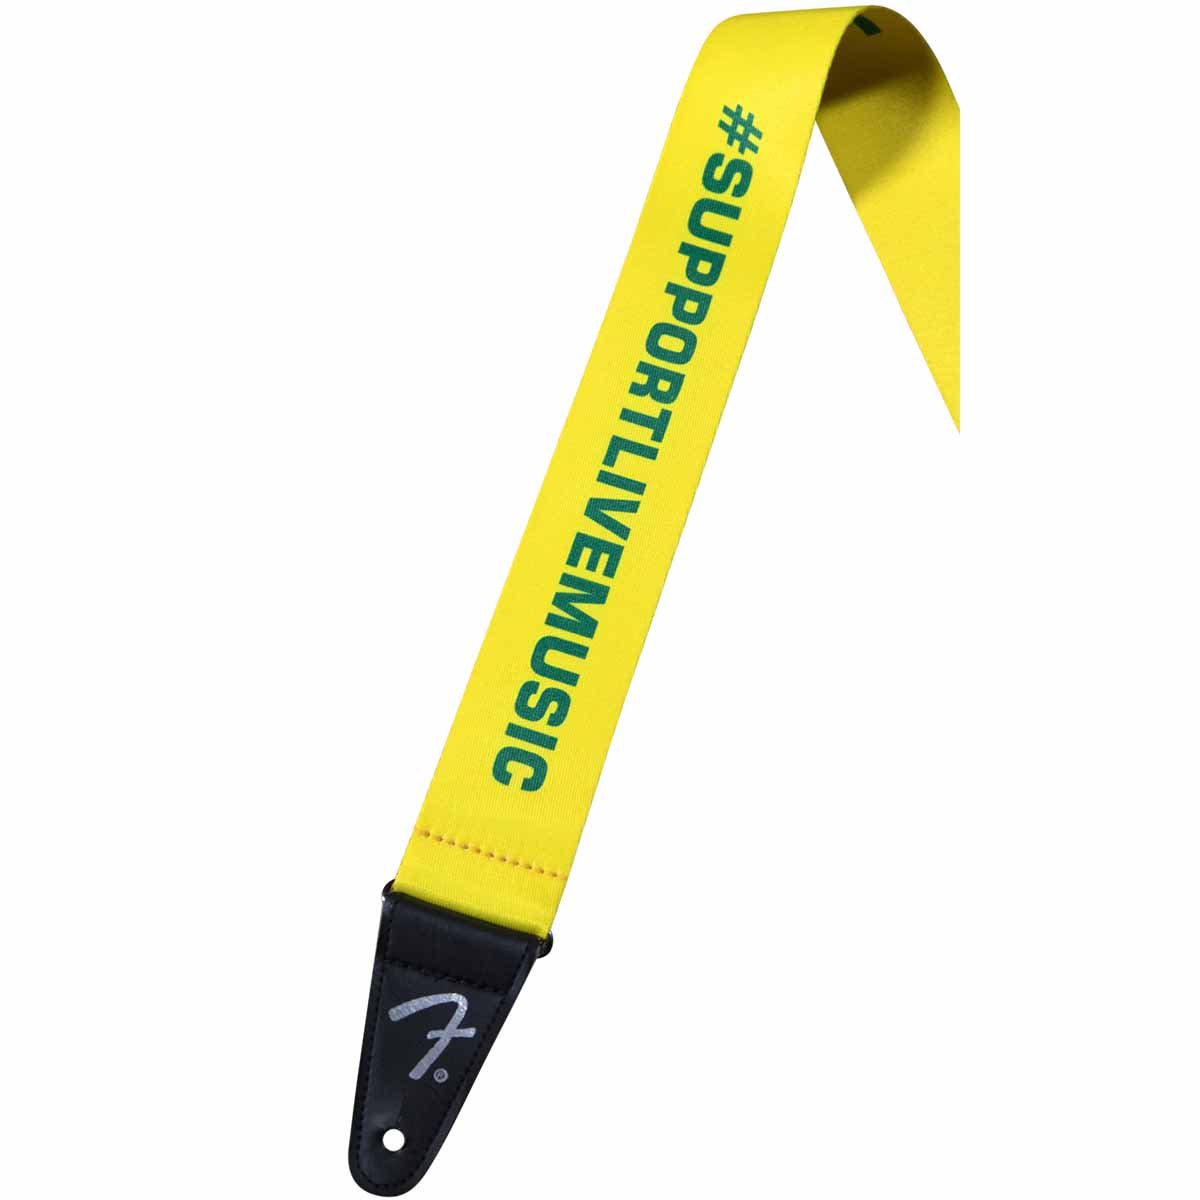 Fender FSR Support Act Charity Guitar Strap - Yellow/green